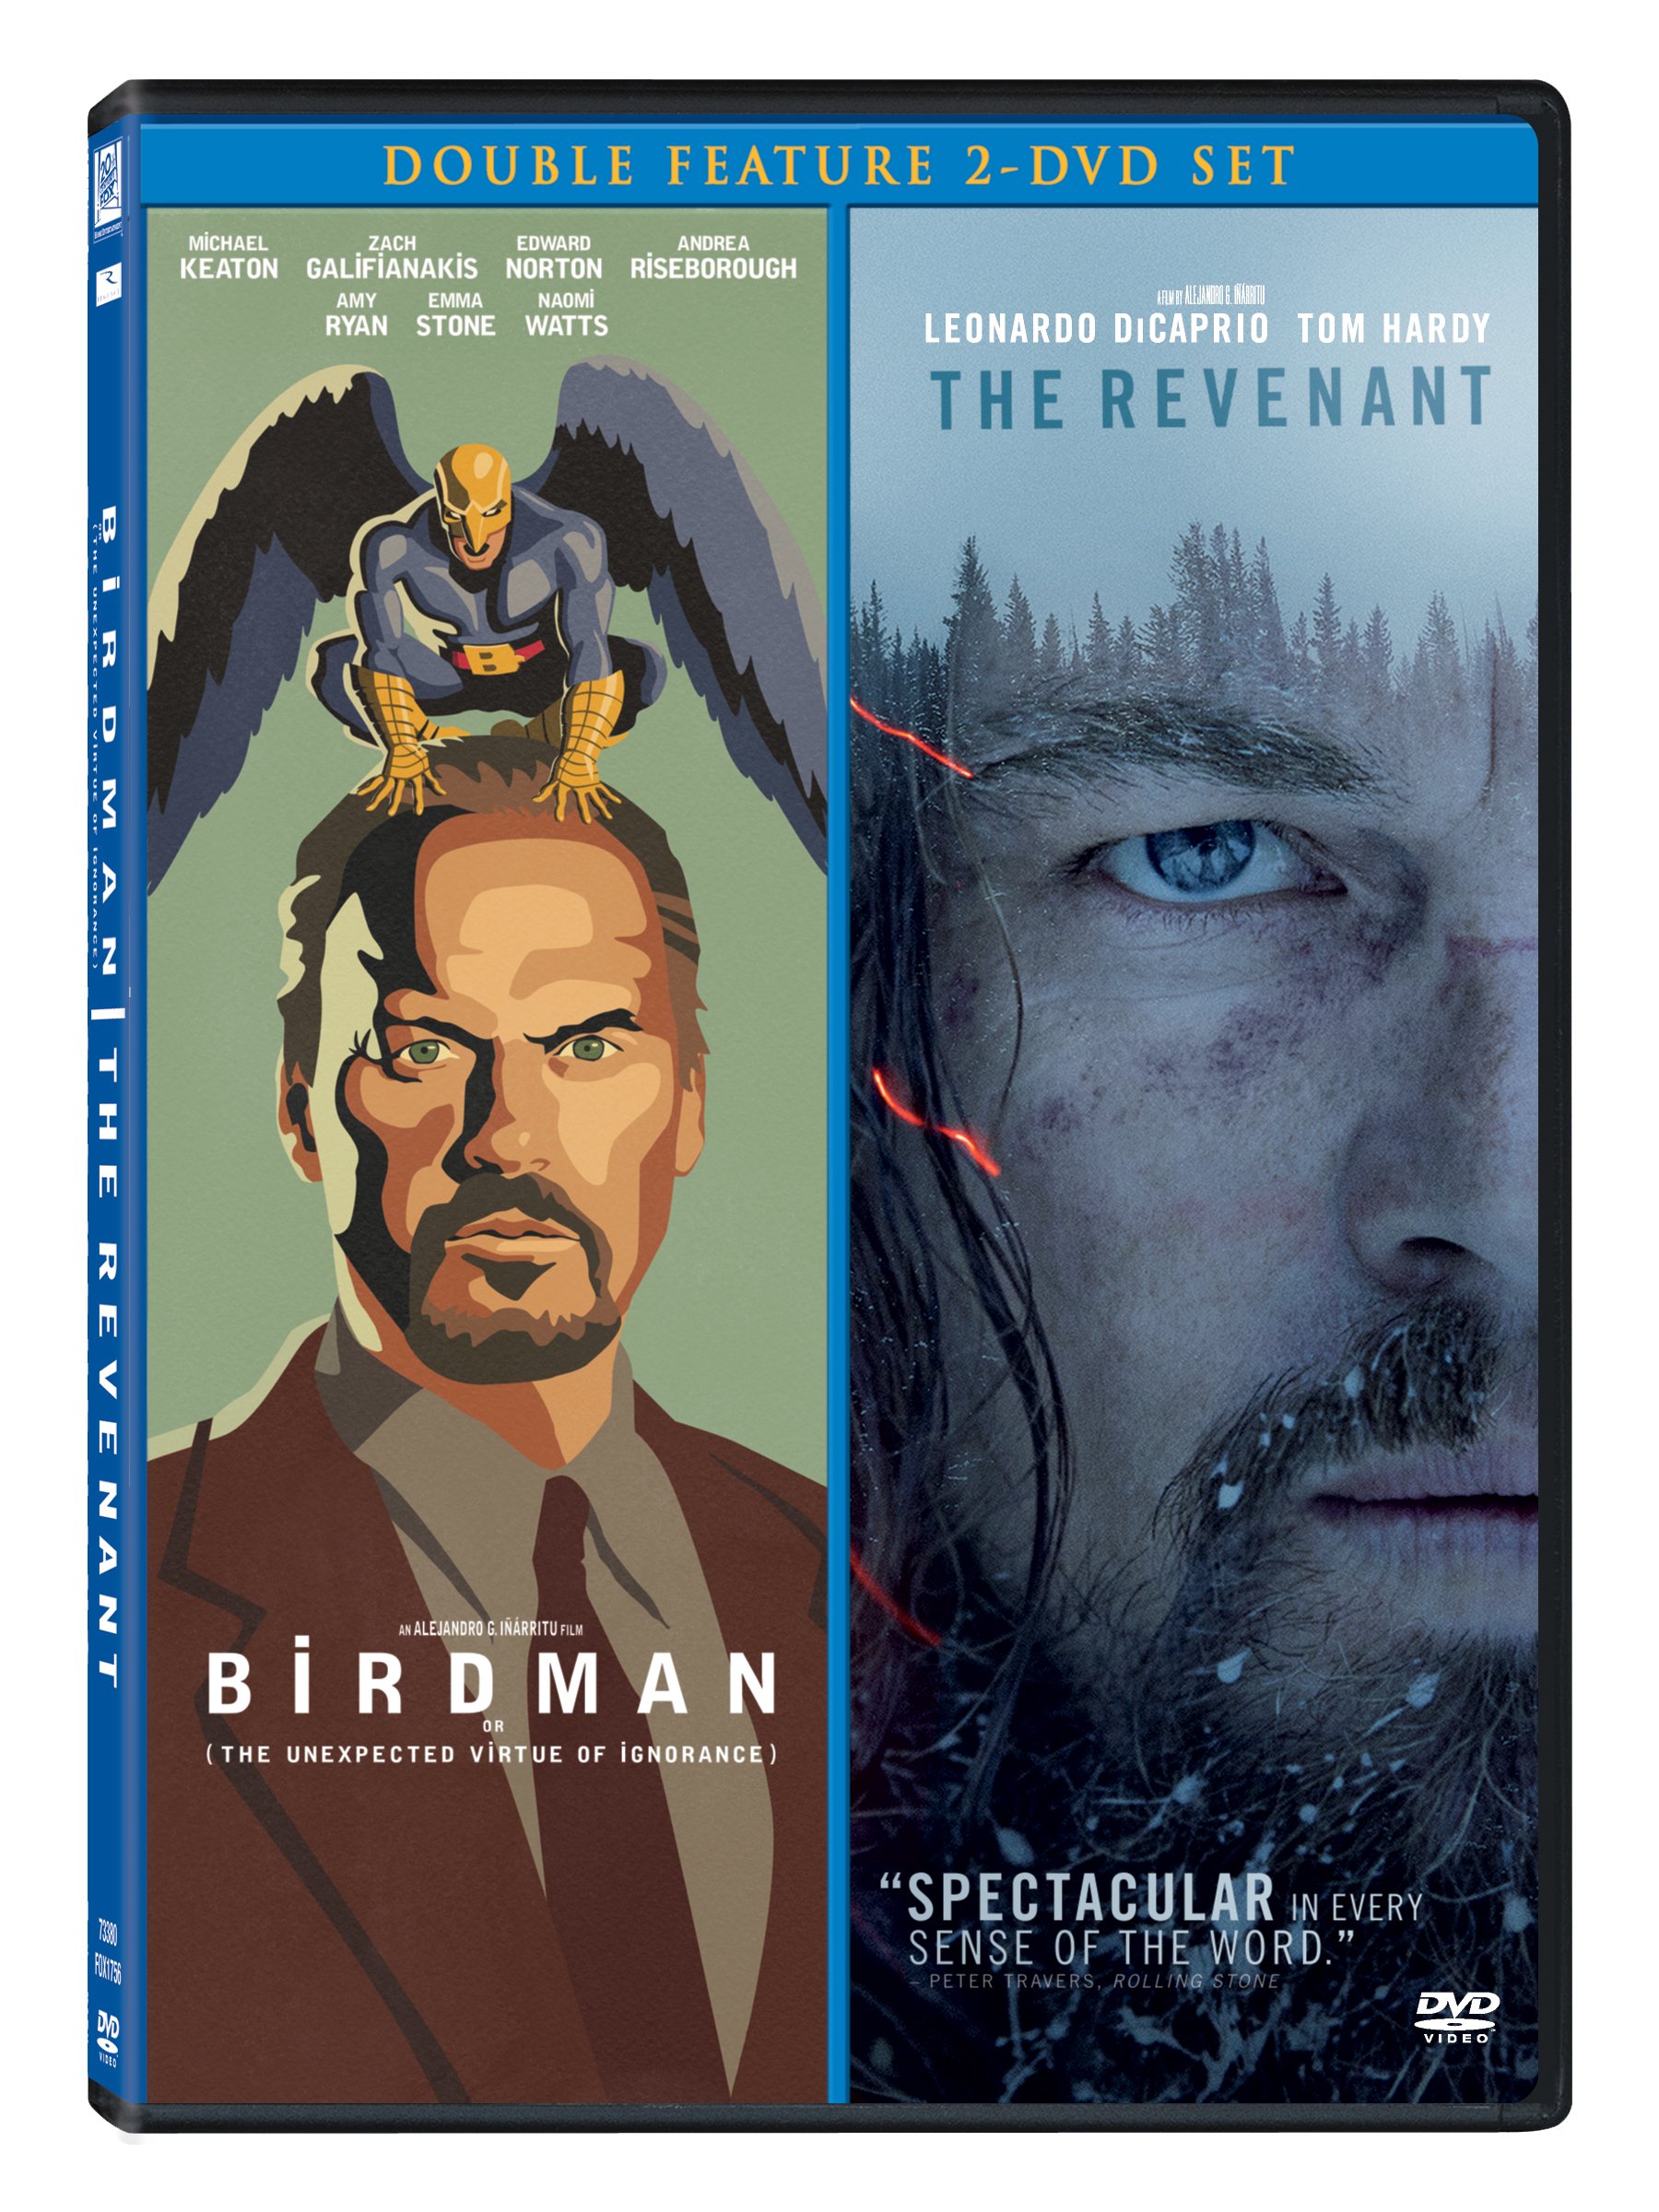 2-movies-collection-birdman-the-revenant-movie-purchase-or-watch-on